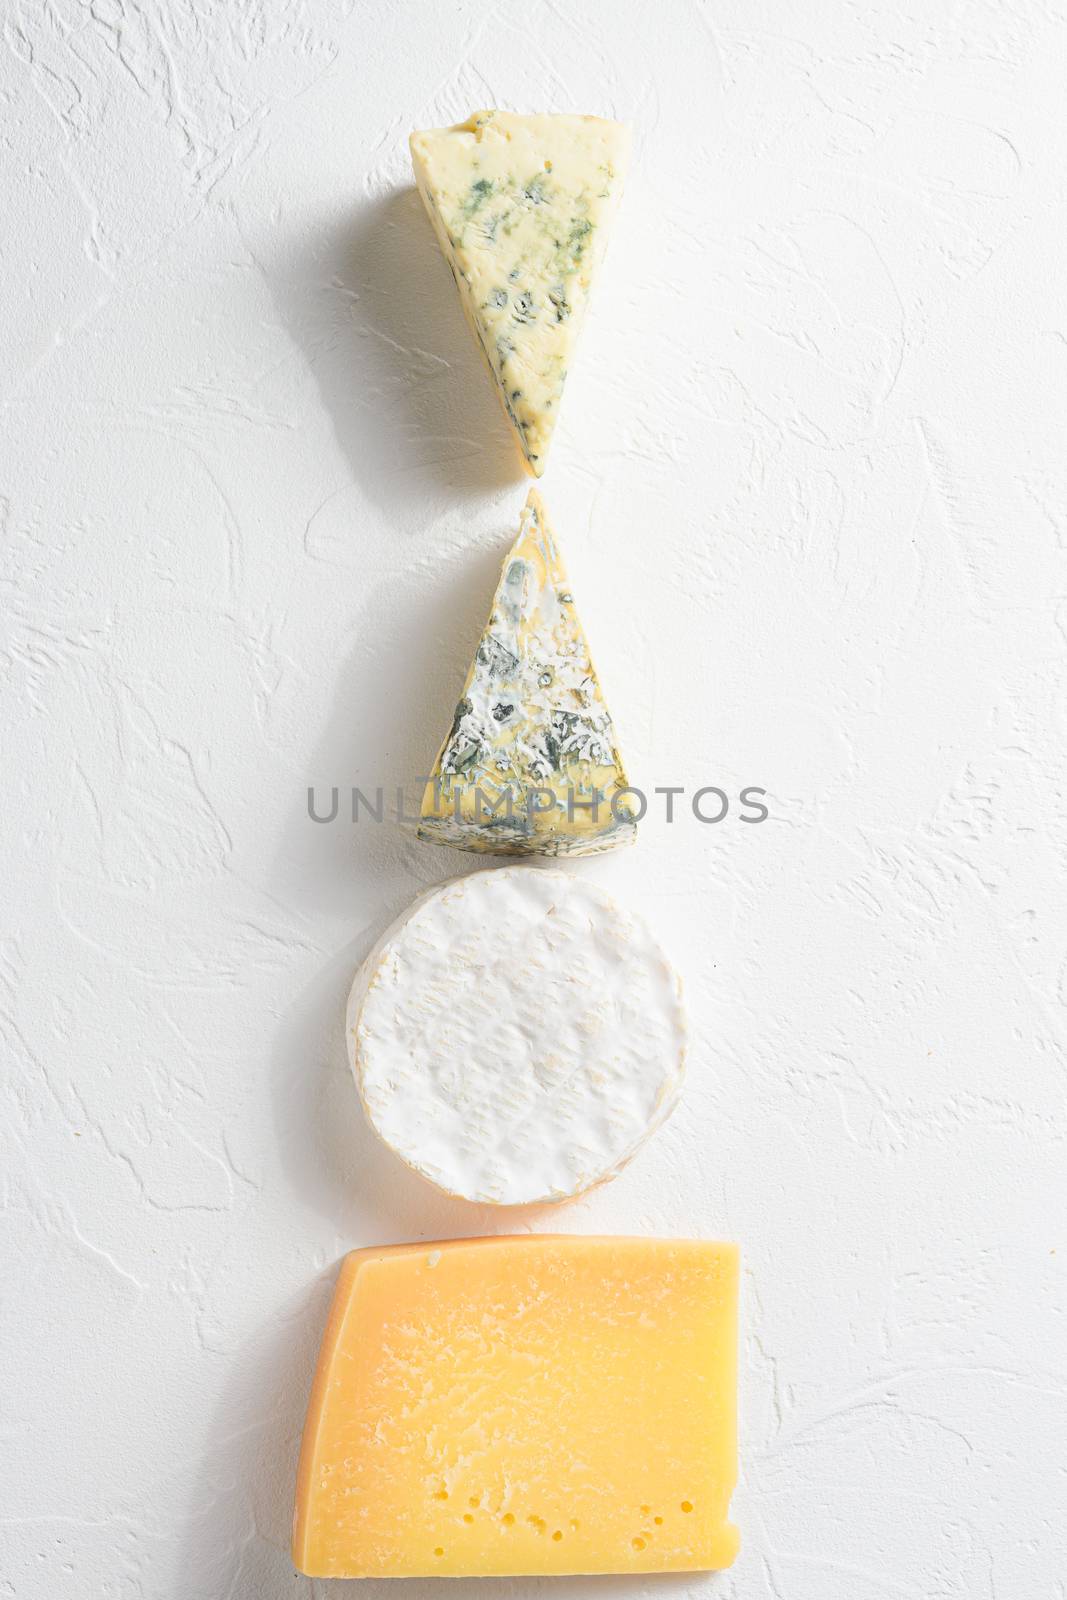 Set cheeses. parmesan , blue cheese, , brie cheese. Top view. On a white background. Free copy space. by Ilianesolenyi